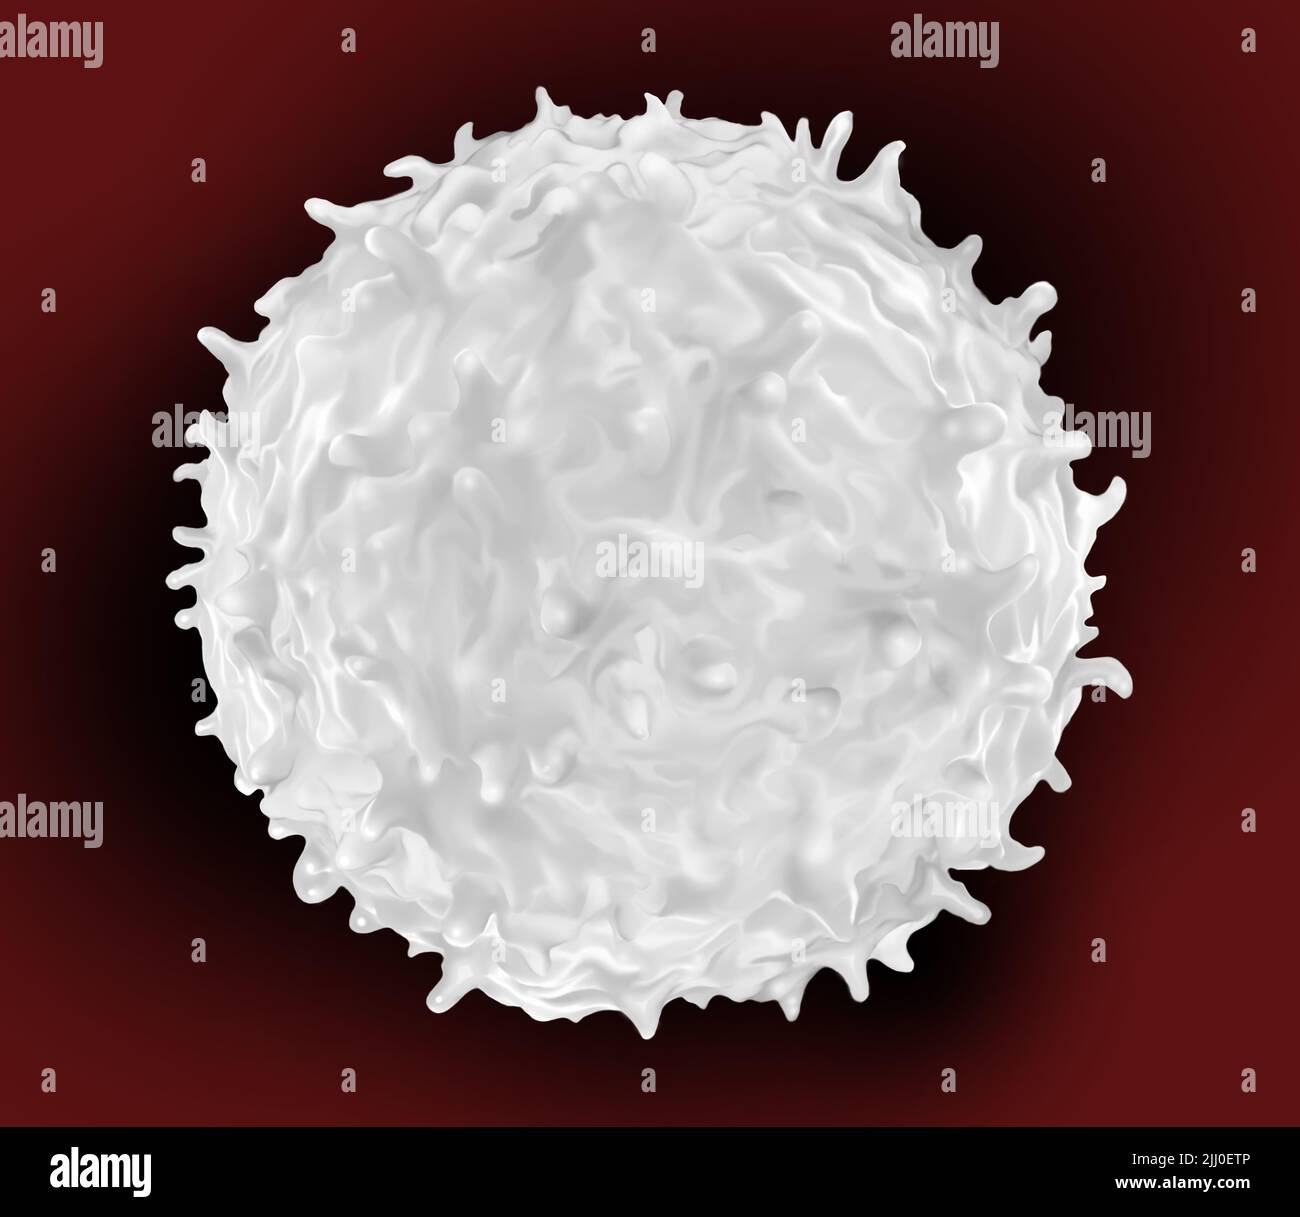 white blood cells found throughout the body in the blood and lymphatic system Stock Photo